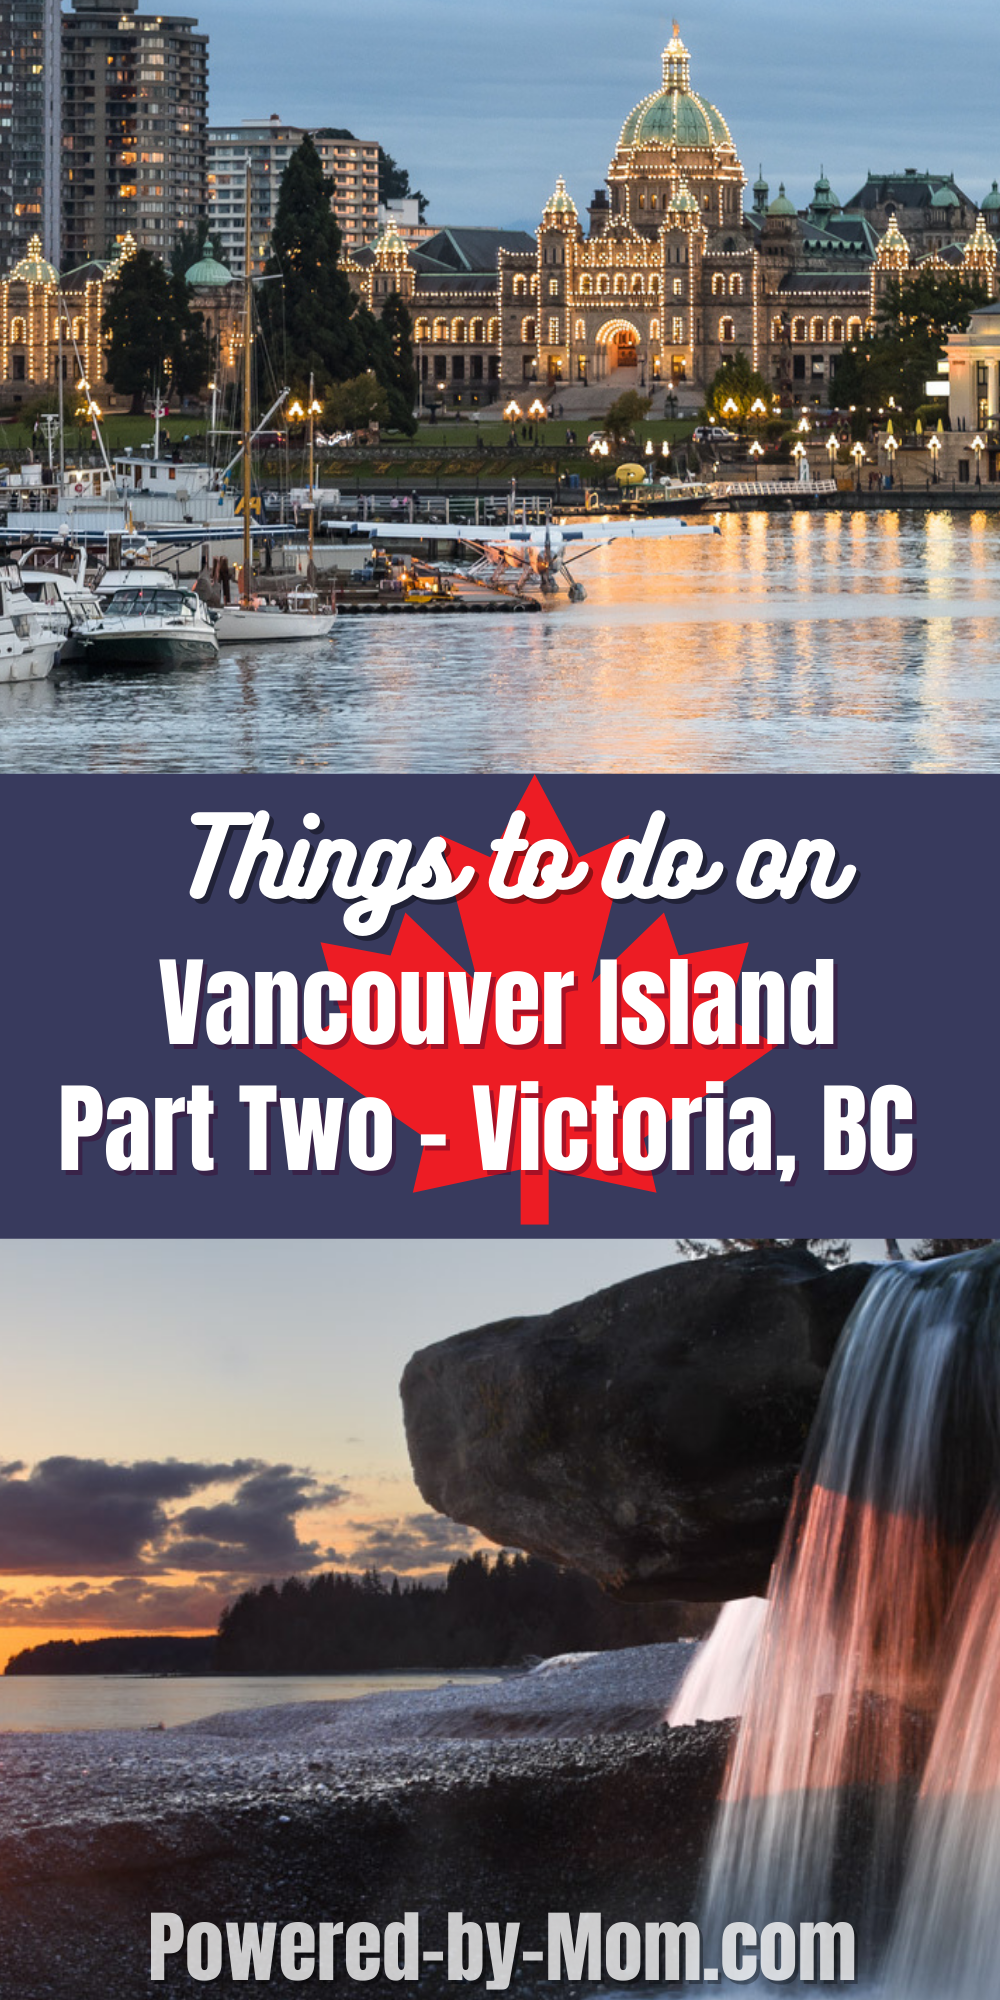 If you're planning a visit to British Columbia (BC), check out all the things to do in Victoria, BC Canada on Vancouver Island. Just a ferry ride from Vancouver, it is a MUST VISIT!